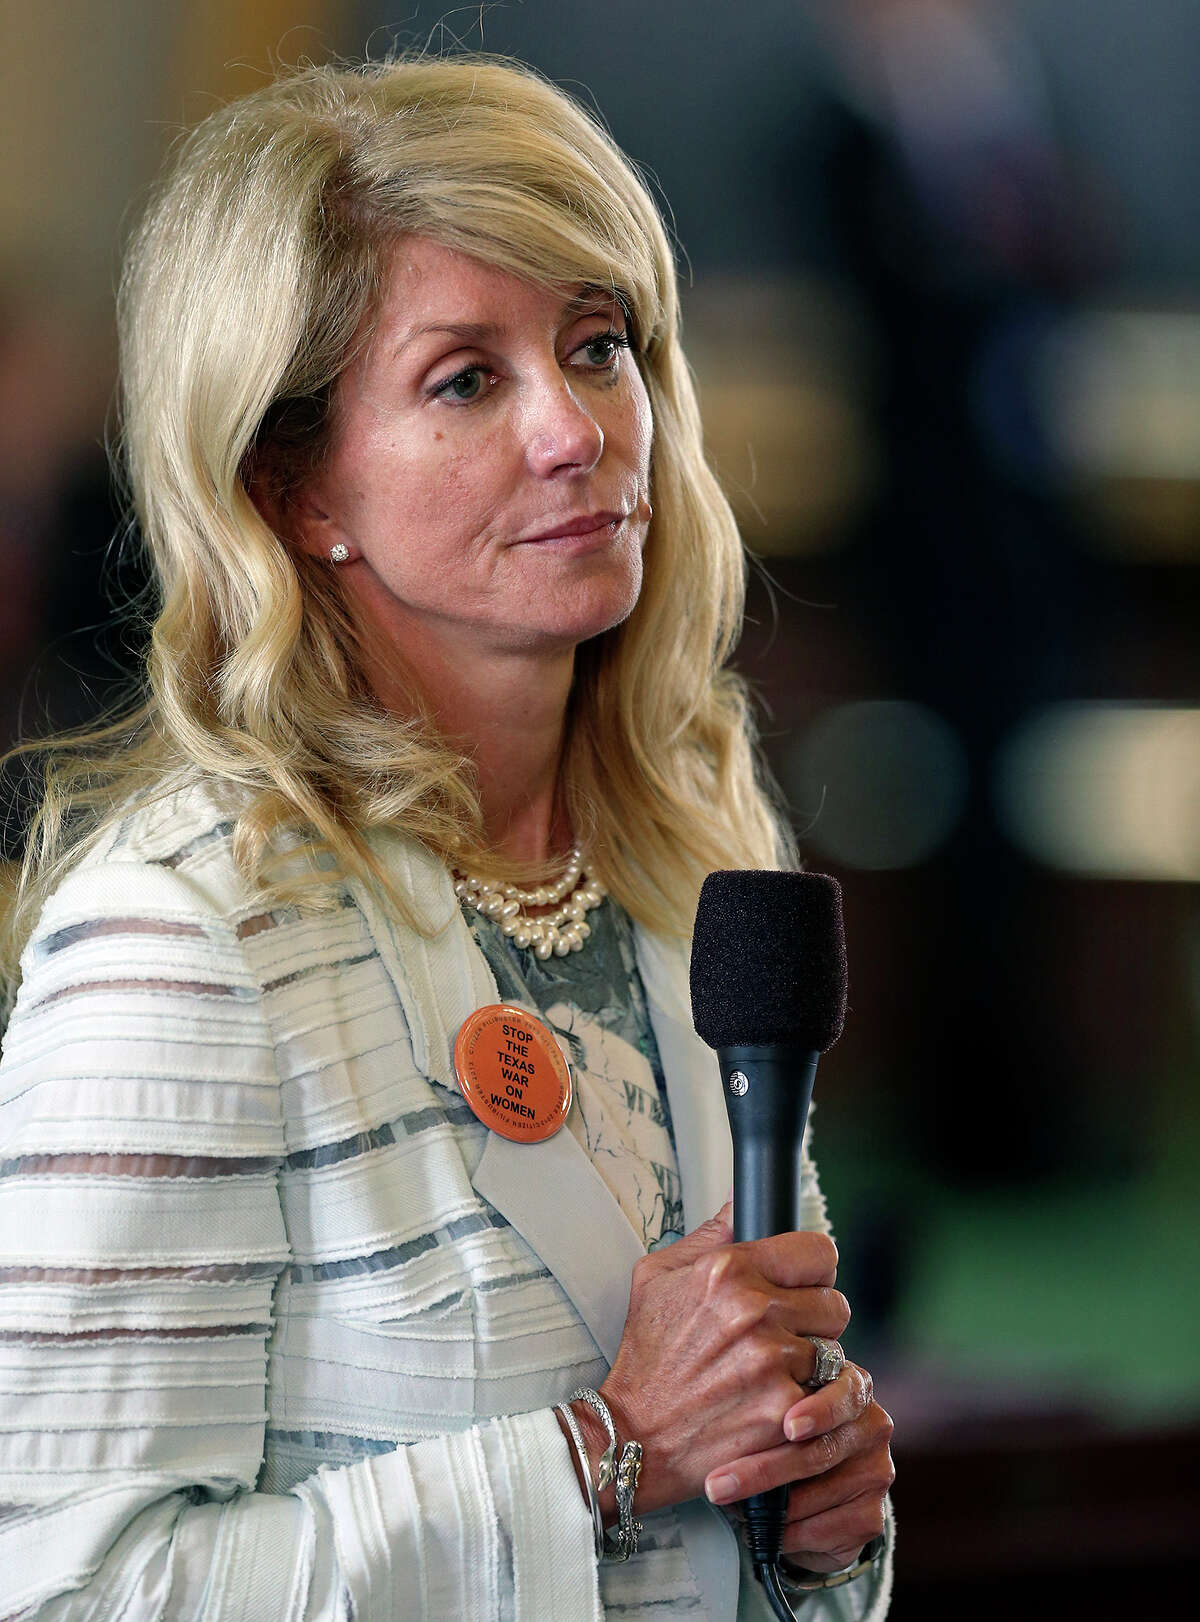 Fort Worth Senator Wendy Davis shows signs of fatigue as she filibusters in an effort to cause abortion legislation to die without a vote on the floor of the Senate Tuesday, June 25, 2013.